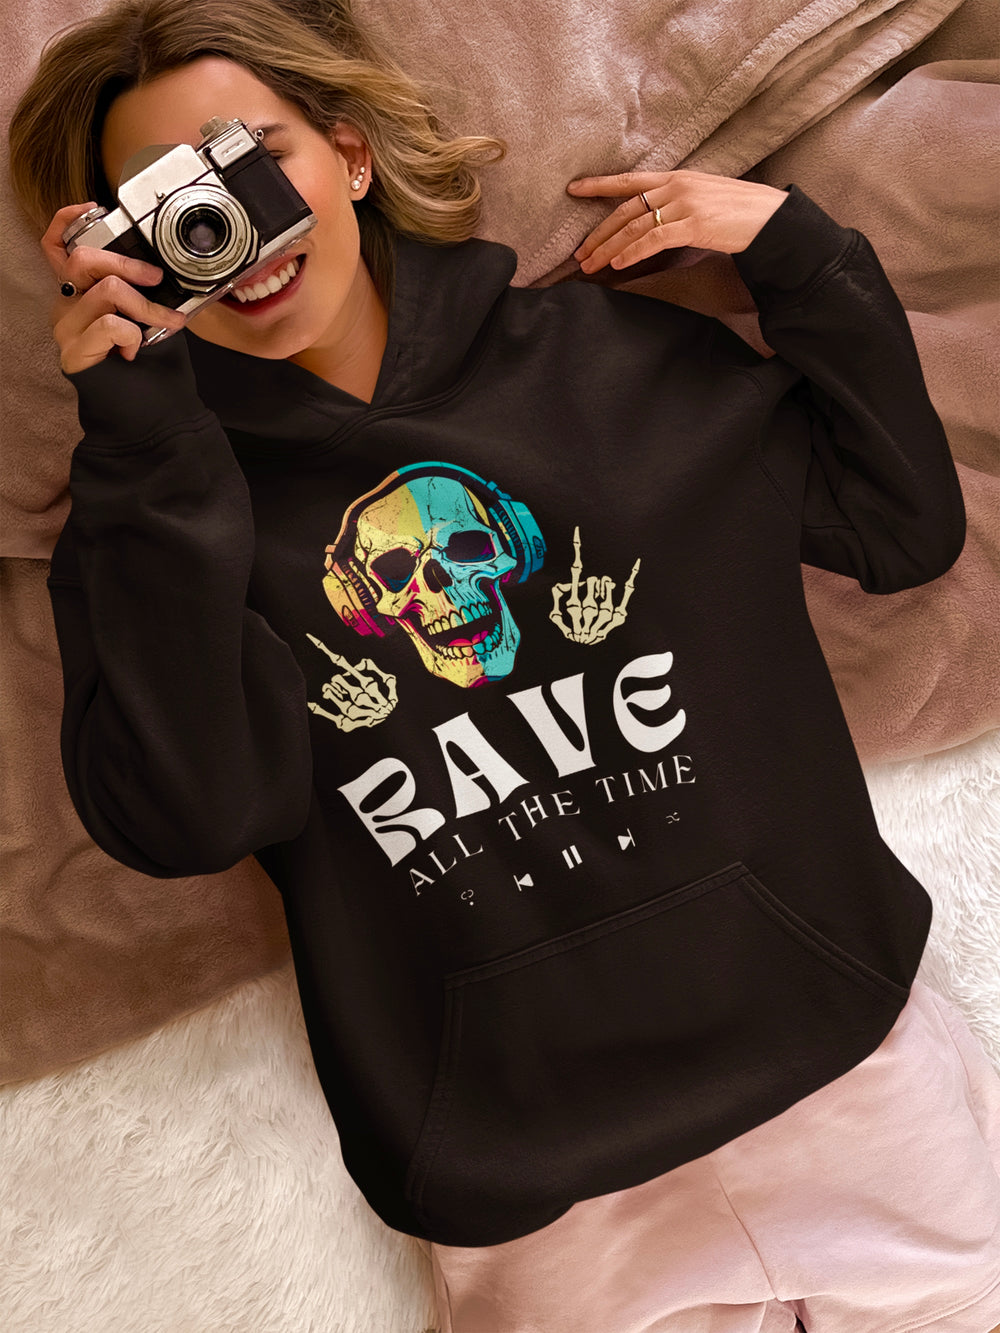 "Rave all the time" Hoodie